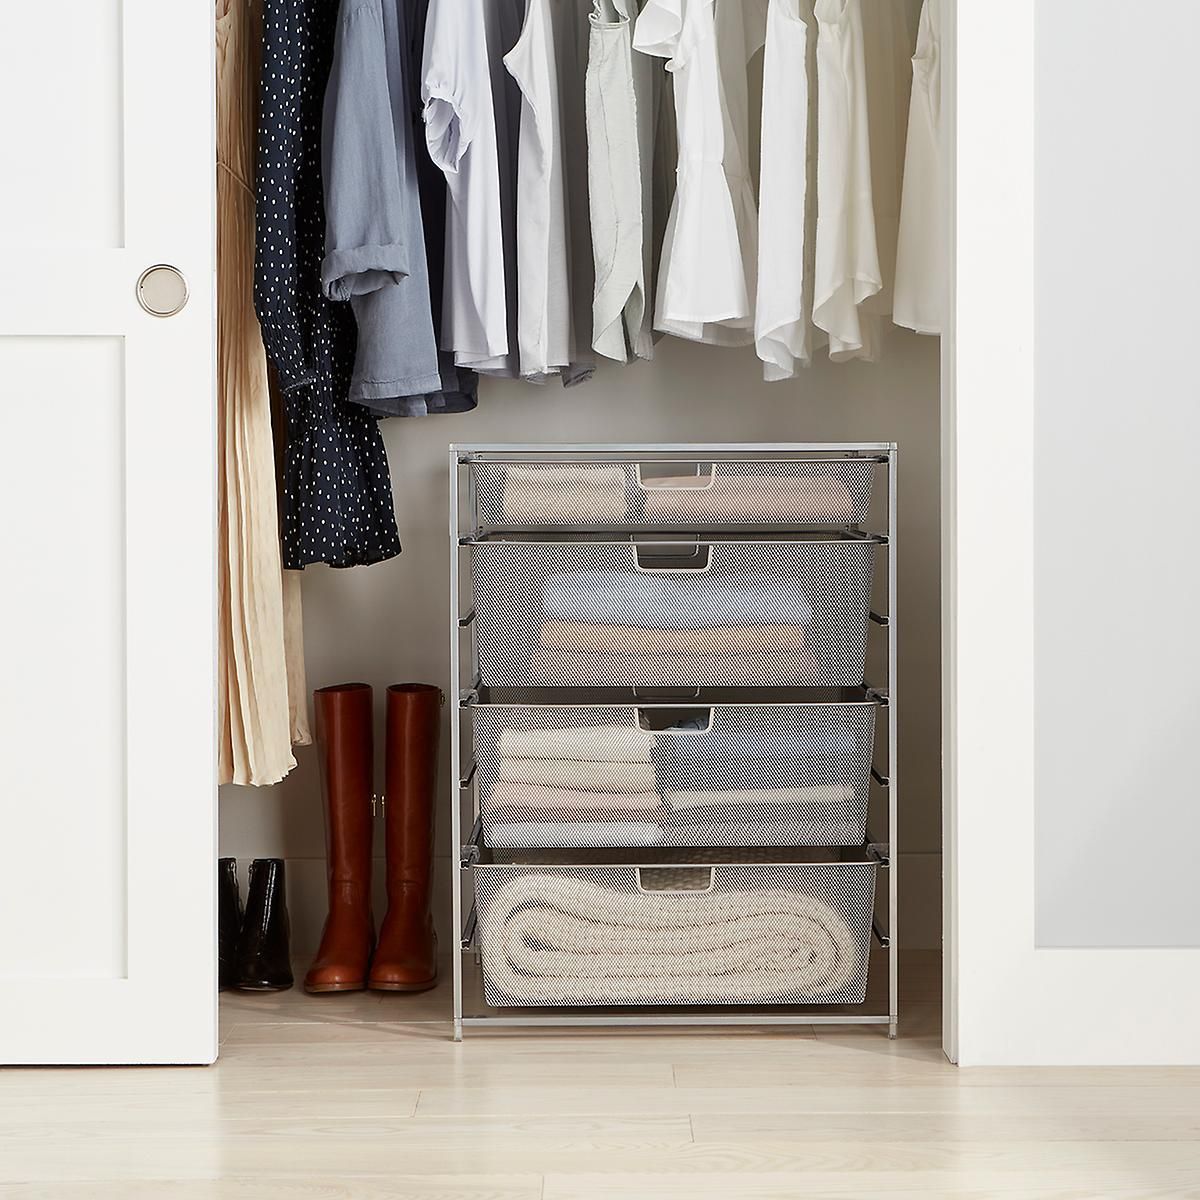 35 Best Closet Organization Ideas To Maximize Space With Closet Organizer Wardrobes (View 2 of 15)